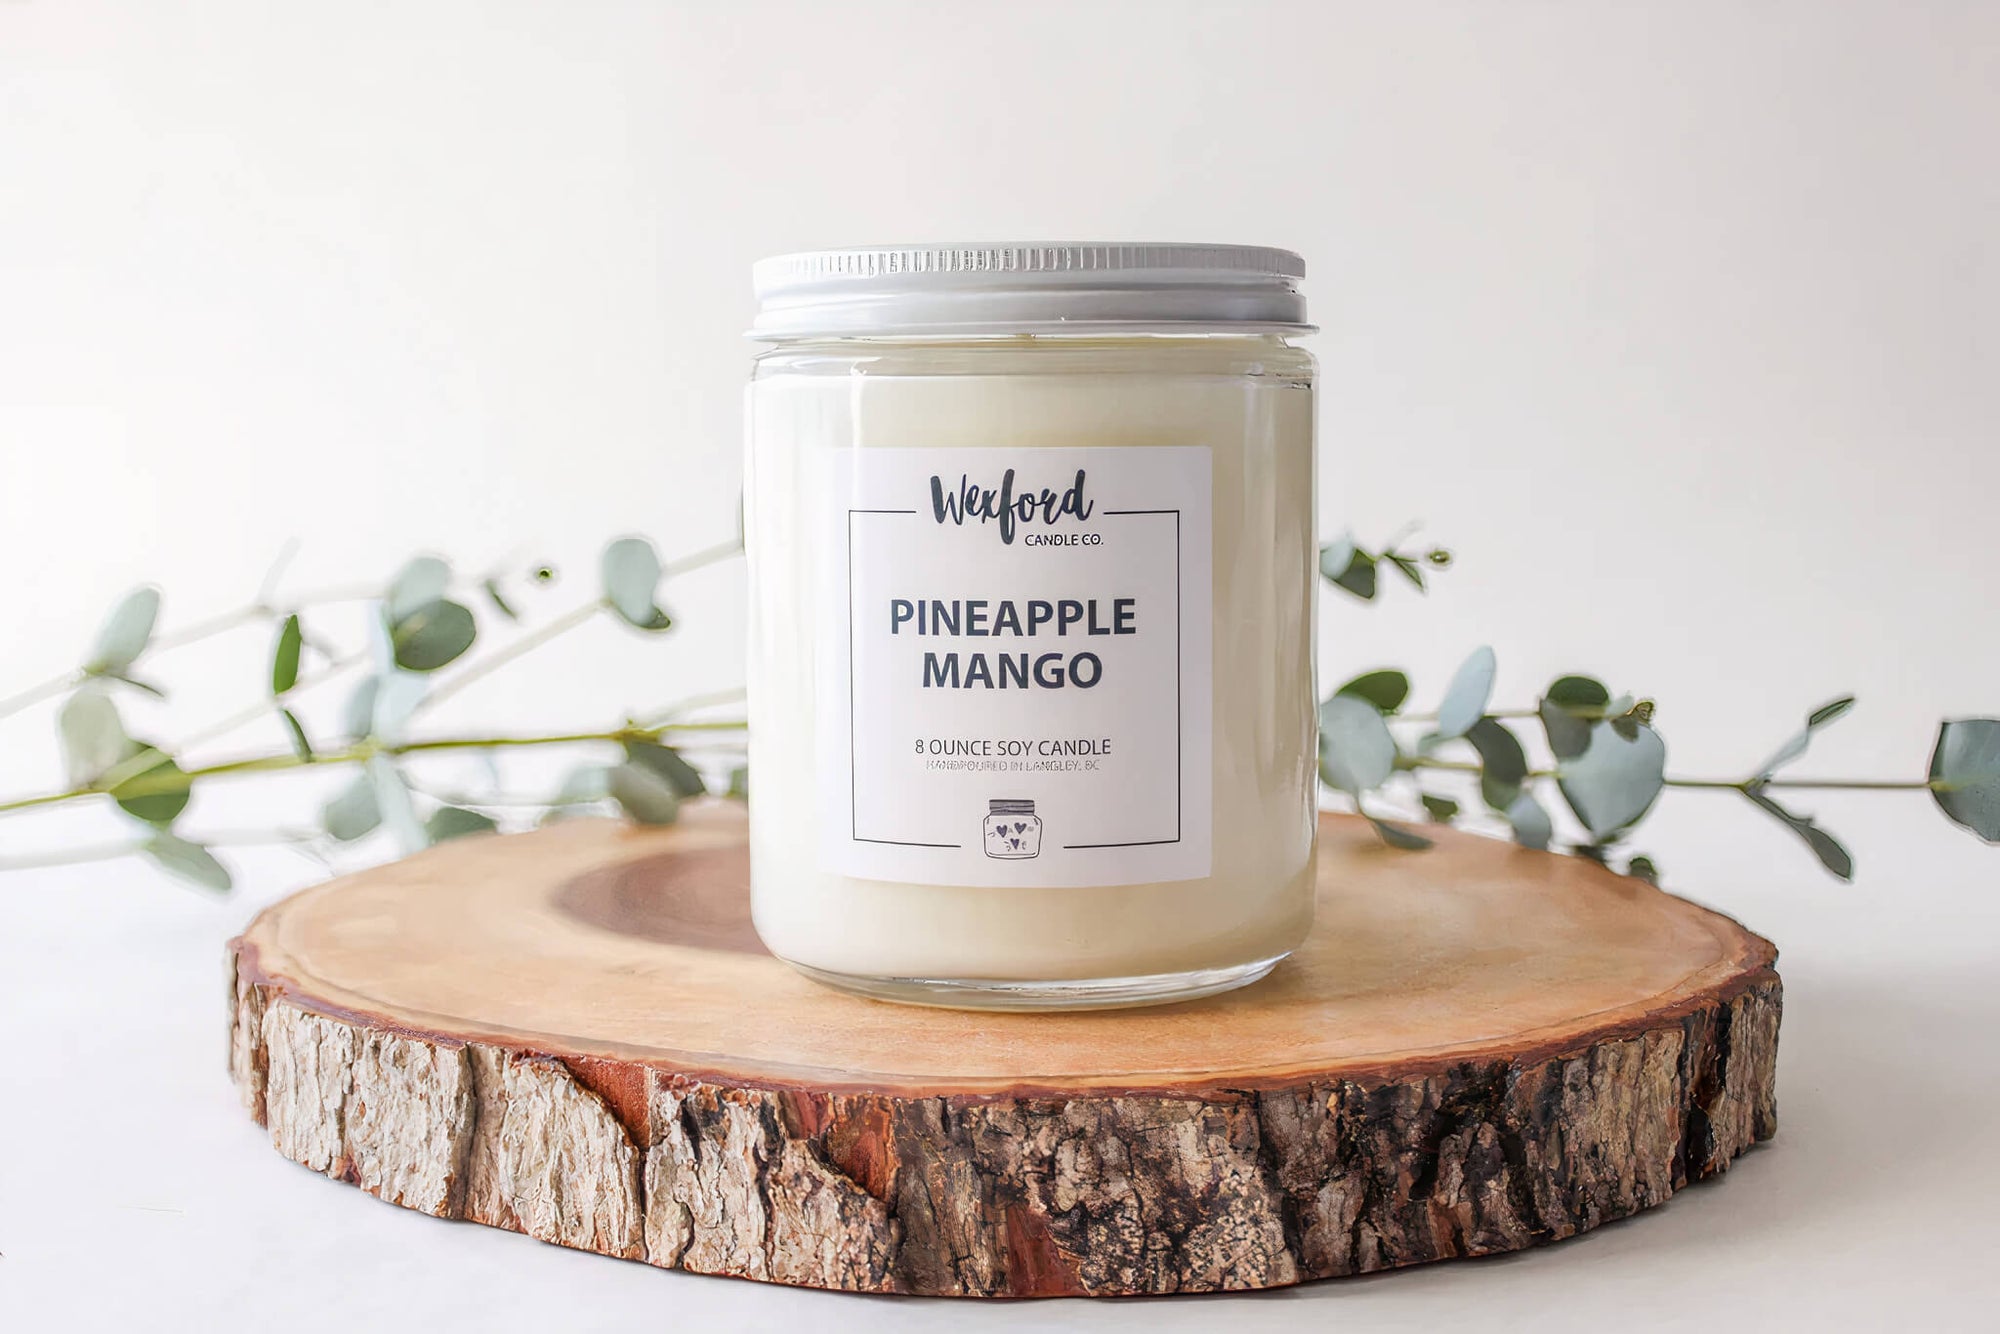 Wexford Candles | Pineapple Mango Soy Candle